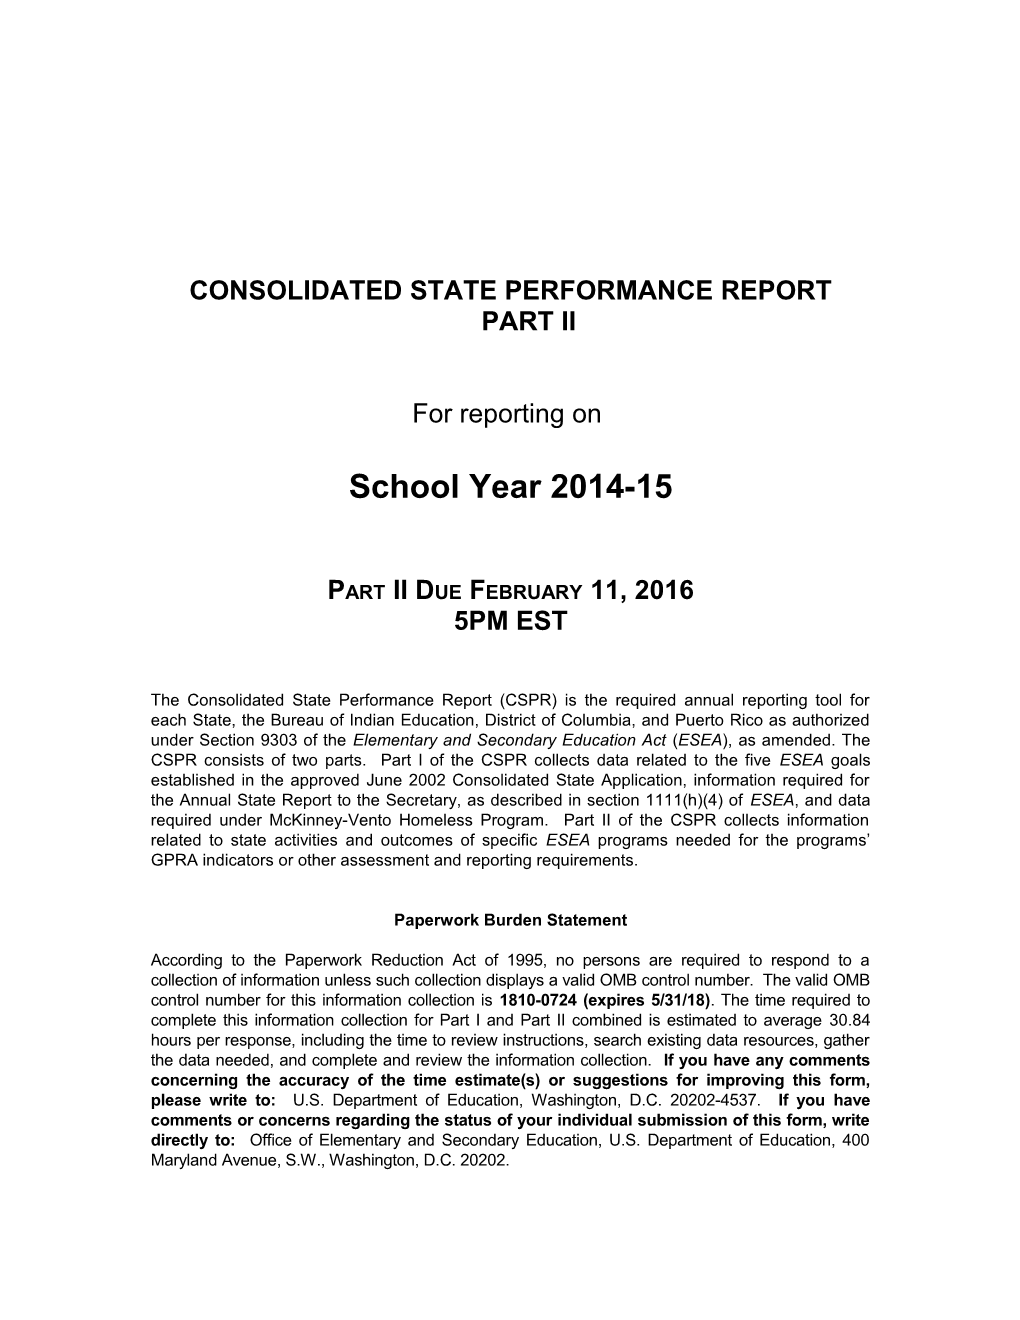 Consolidated State Performance Report: Part II for Reporting on School Year 2014-15 (MS Word)